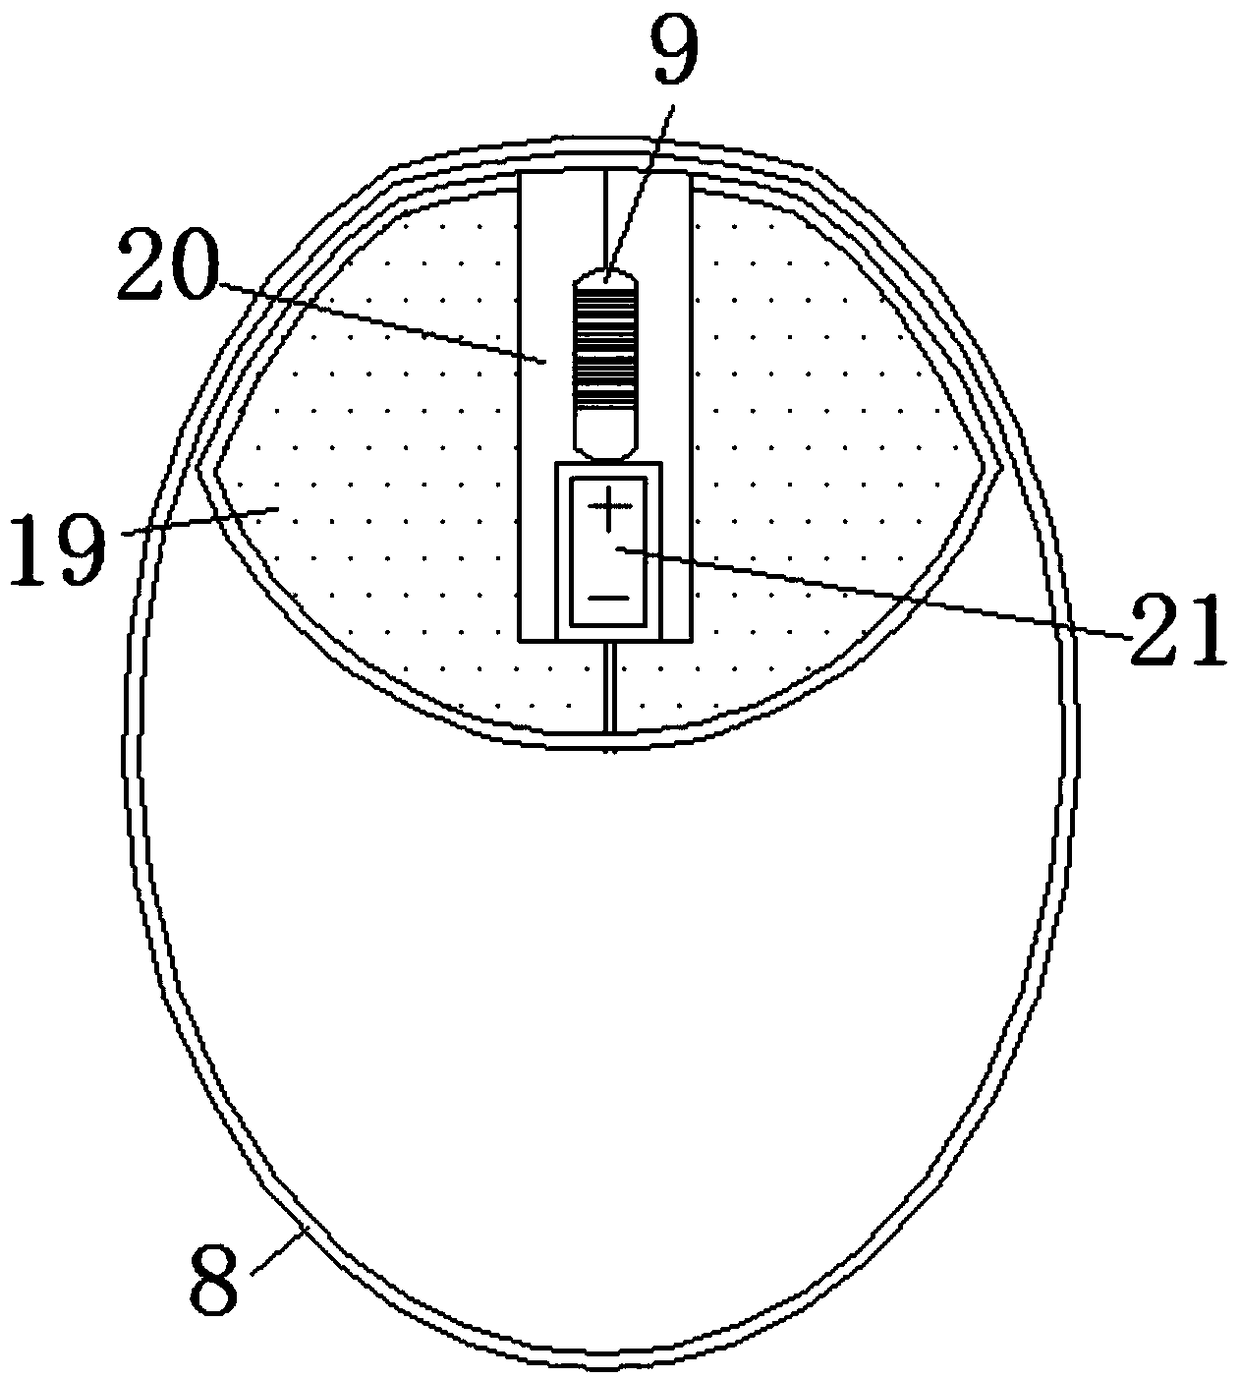 Mouse with retractable mouse cable for computer technology development